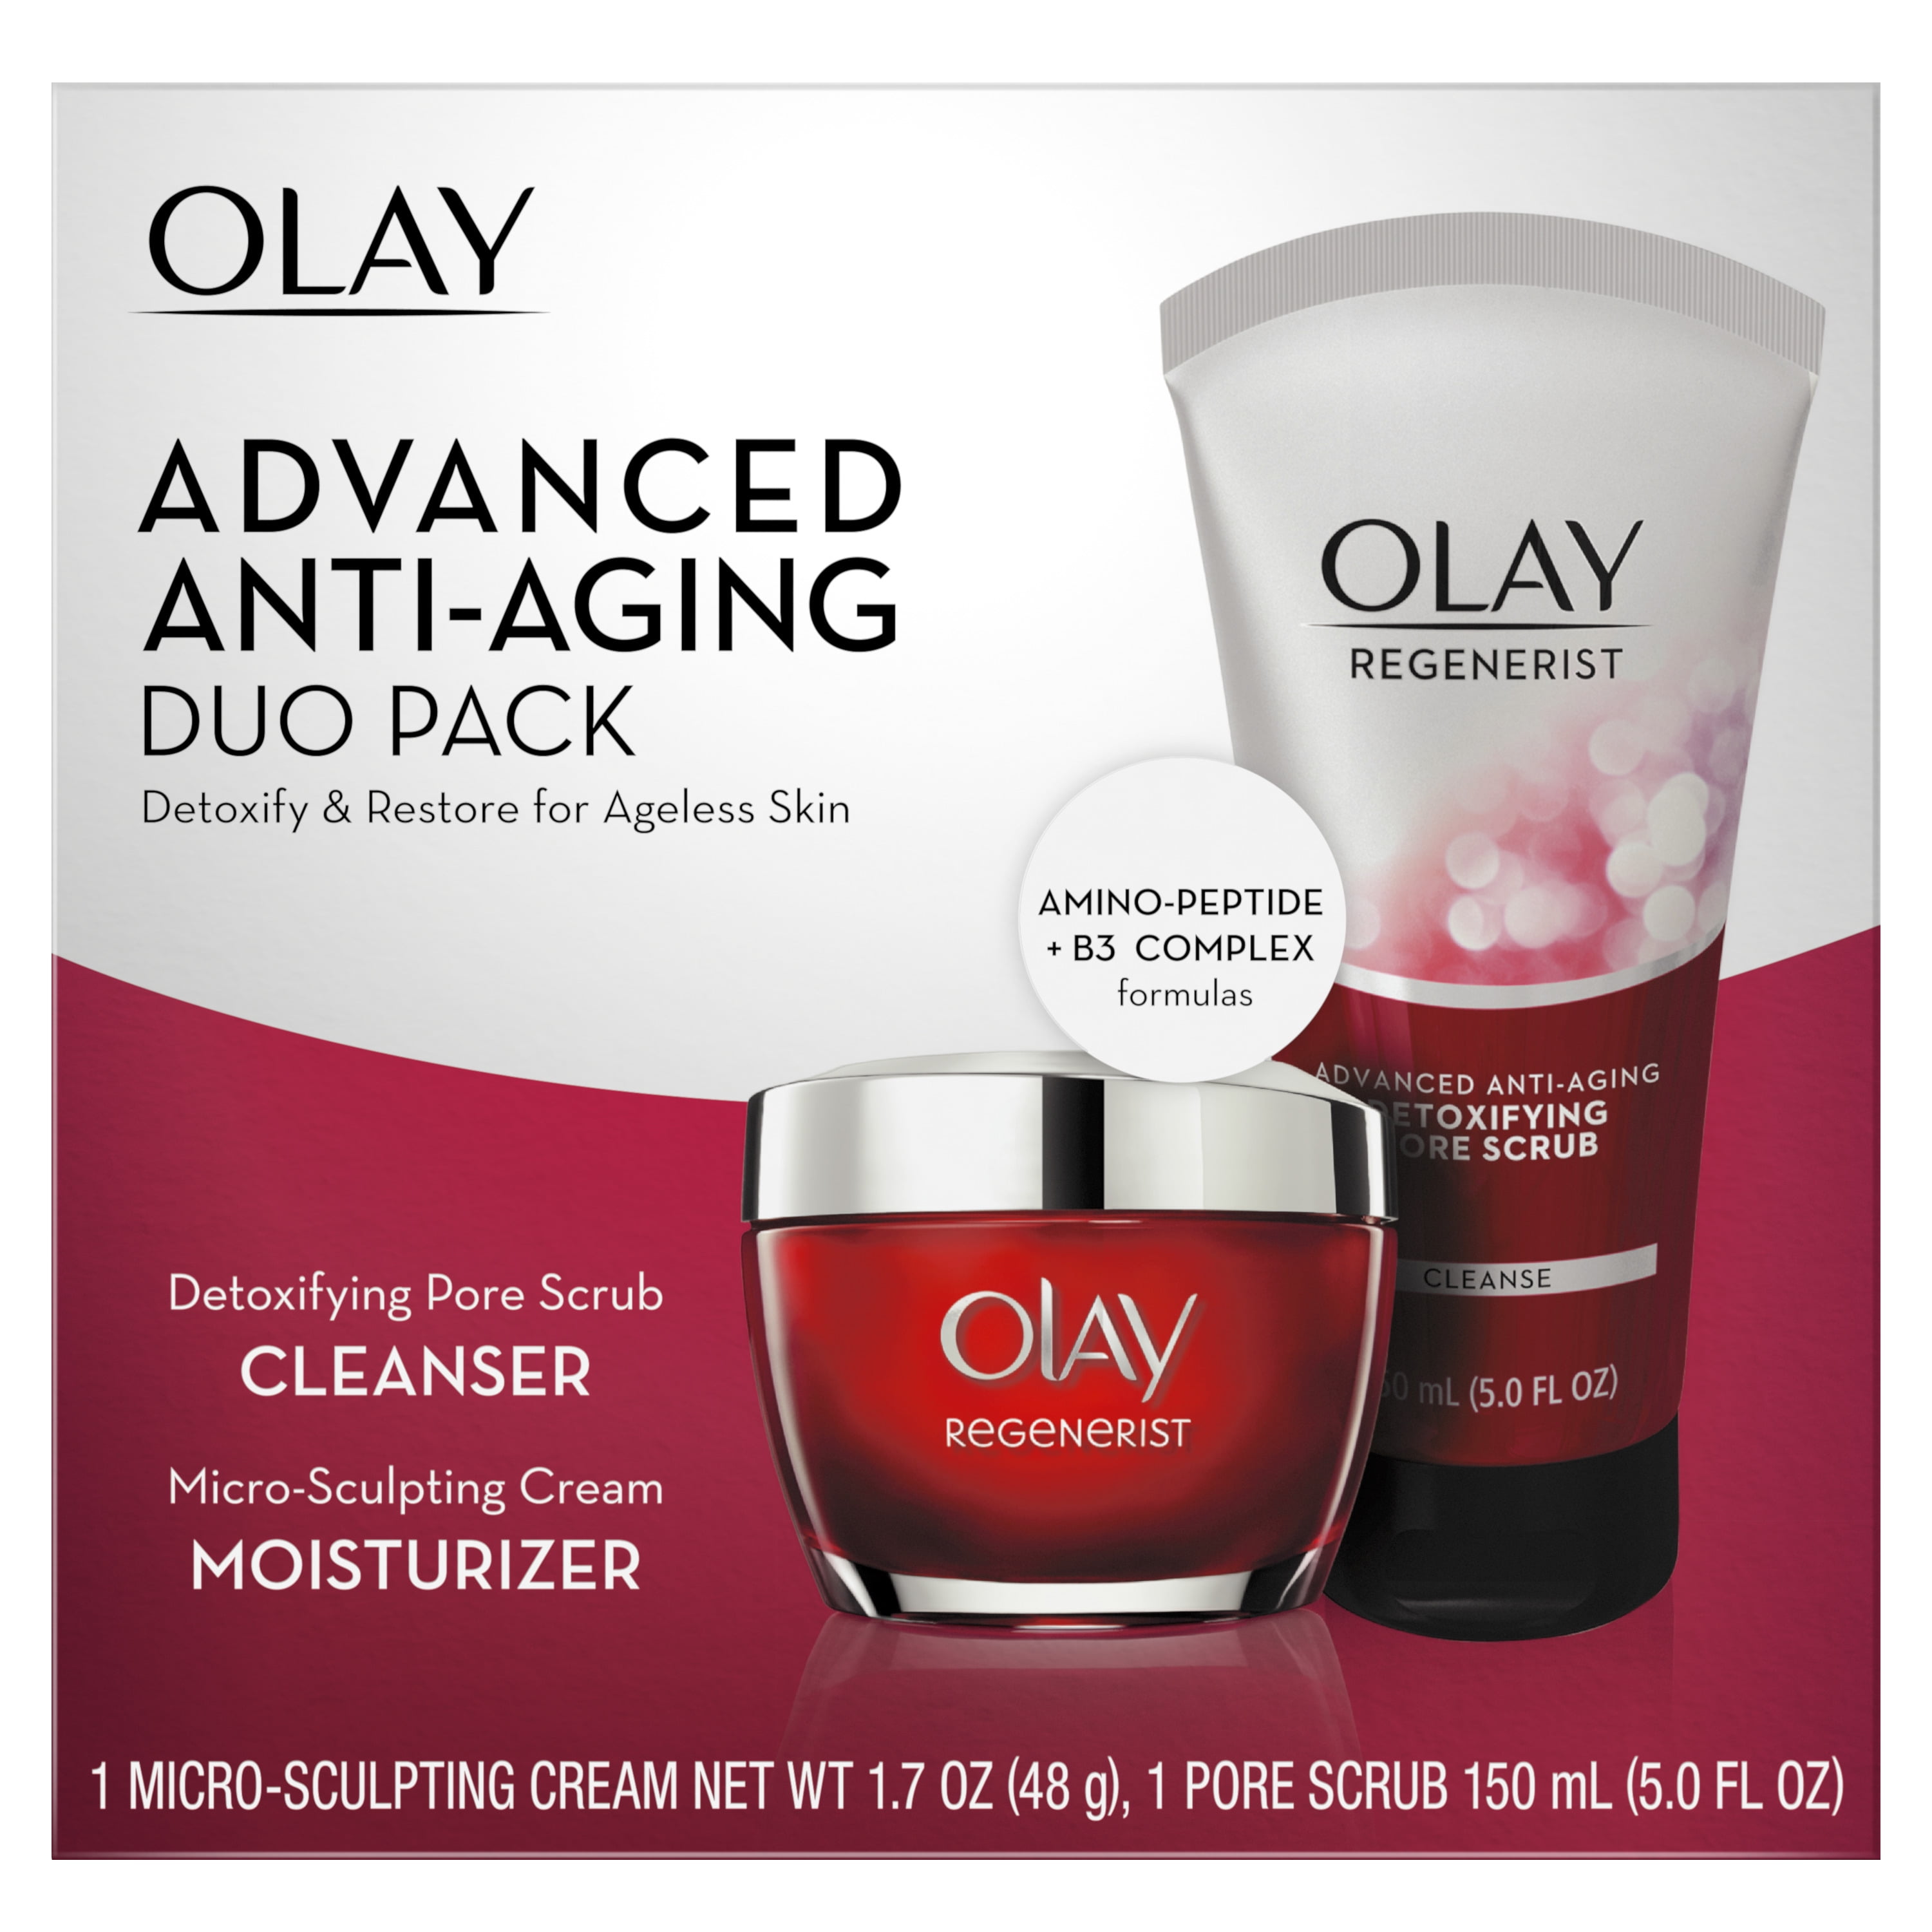 Olay Regenerist Advanced AntiAging Cleanser and Moisturizer Duo Pack